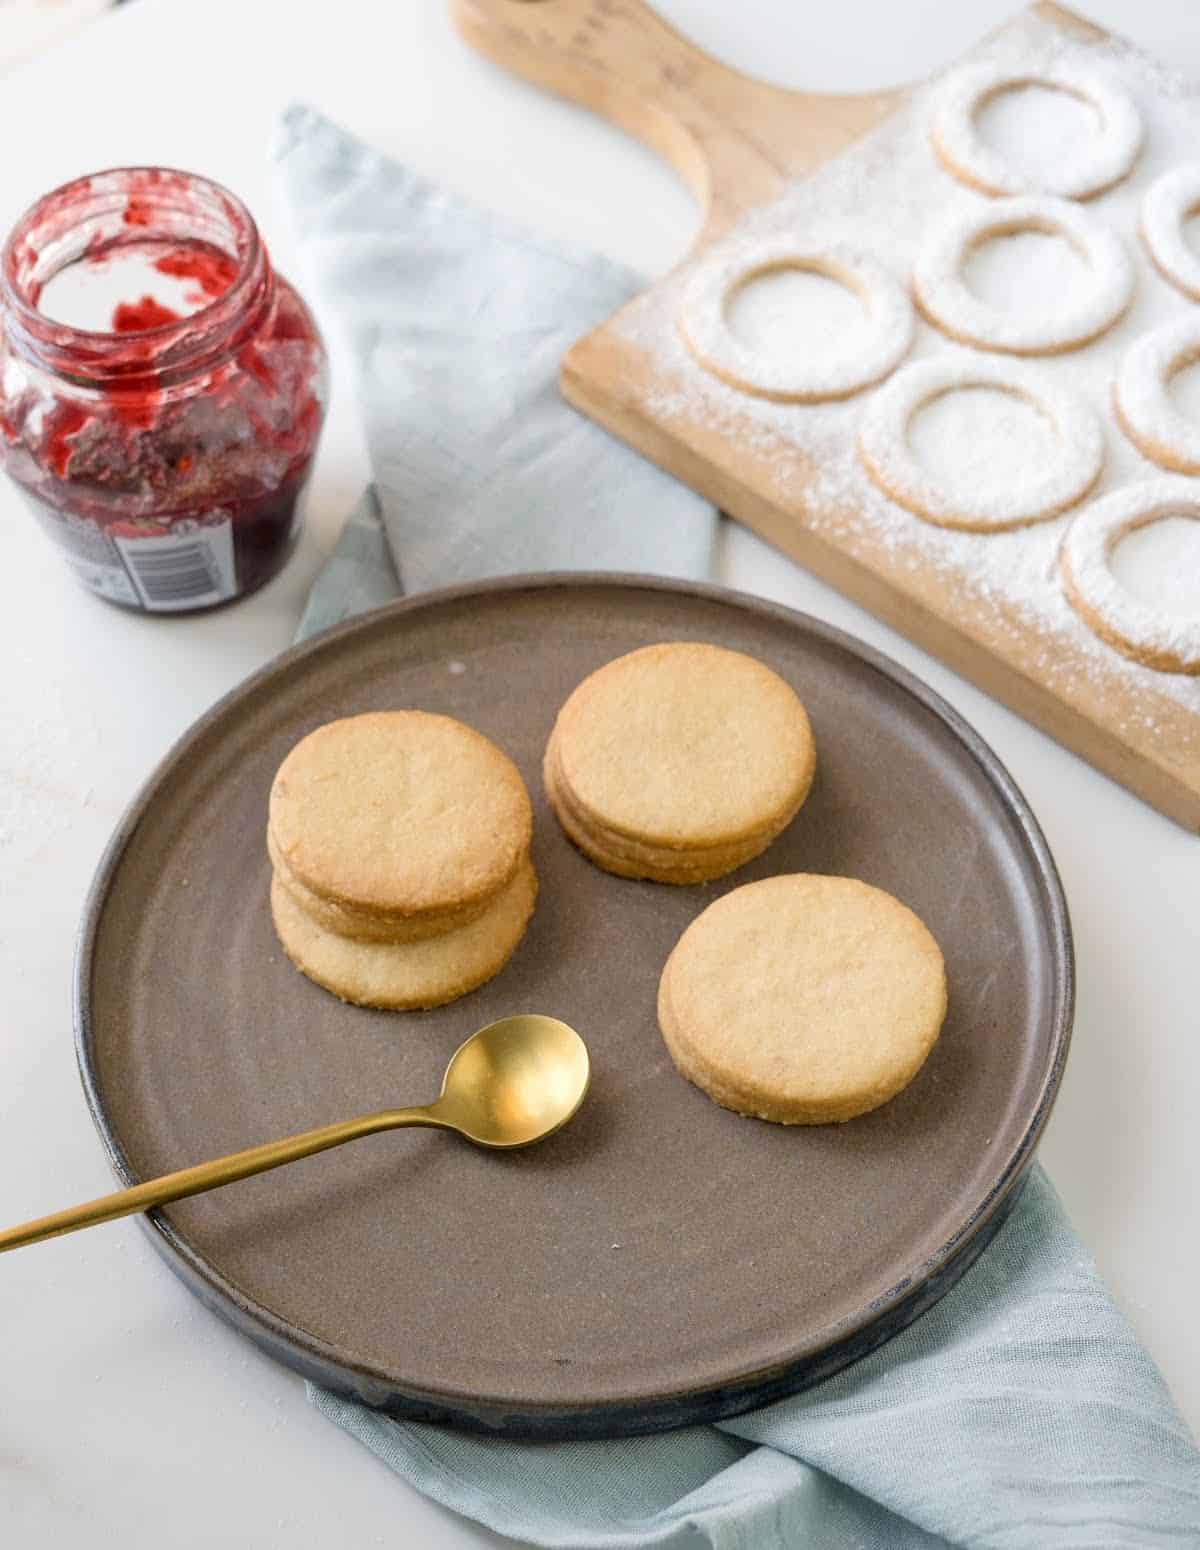 Brown plate with almond cookies on a white surface with a blue cloth. Jar of jam and wooden board with cookie rings.